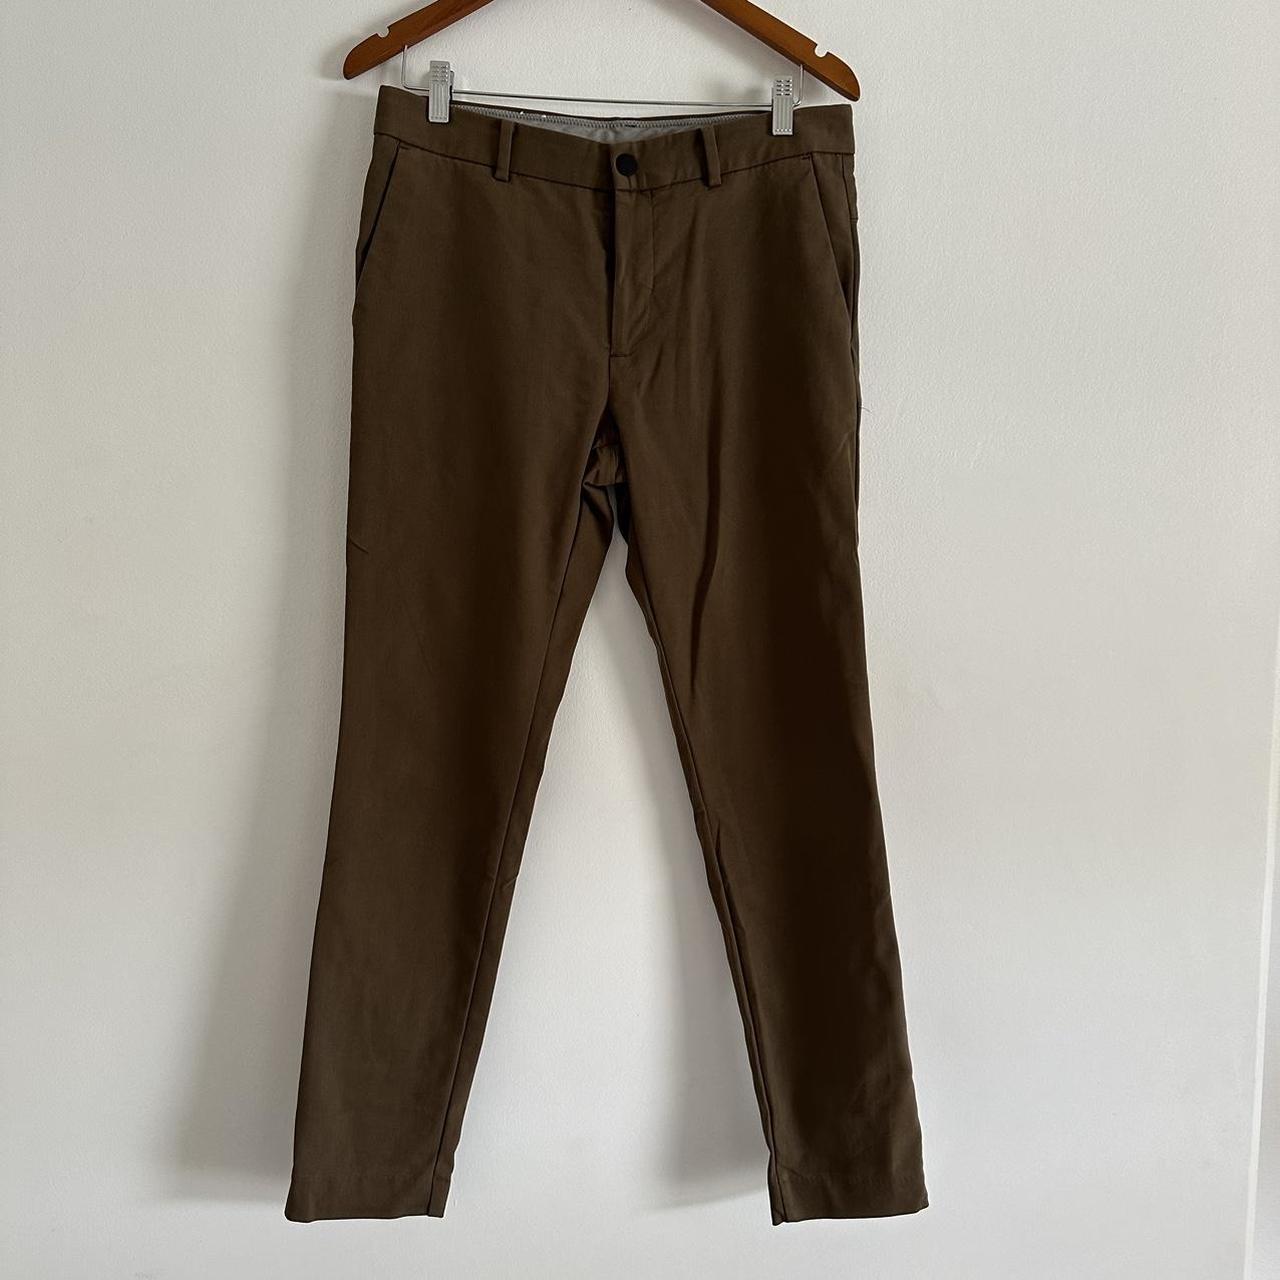 SABA Judd chino, brown, size 31. Length would be a... - Depop